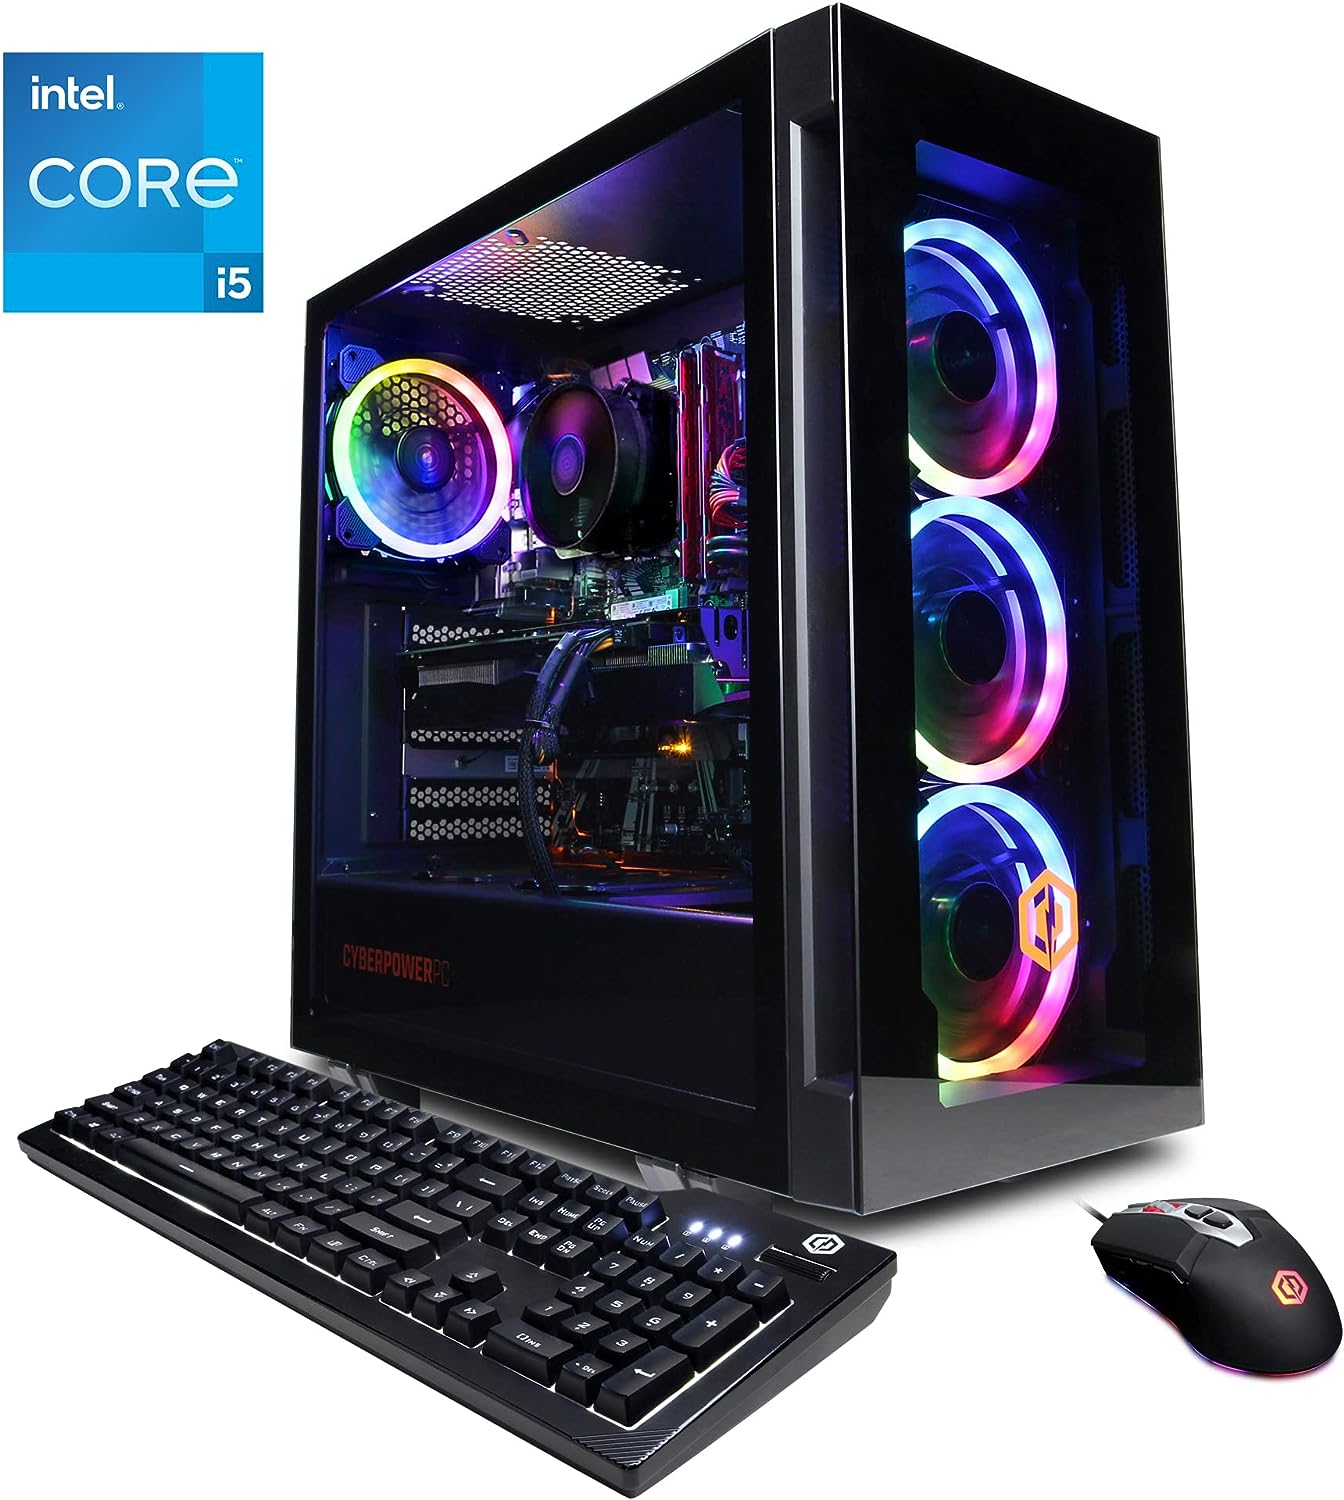 CYBERPOWERPC Gamer Xtreme VR Gaming PC Review